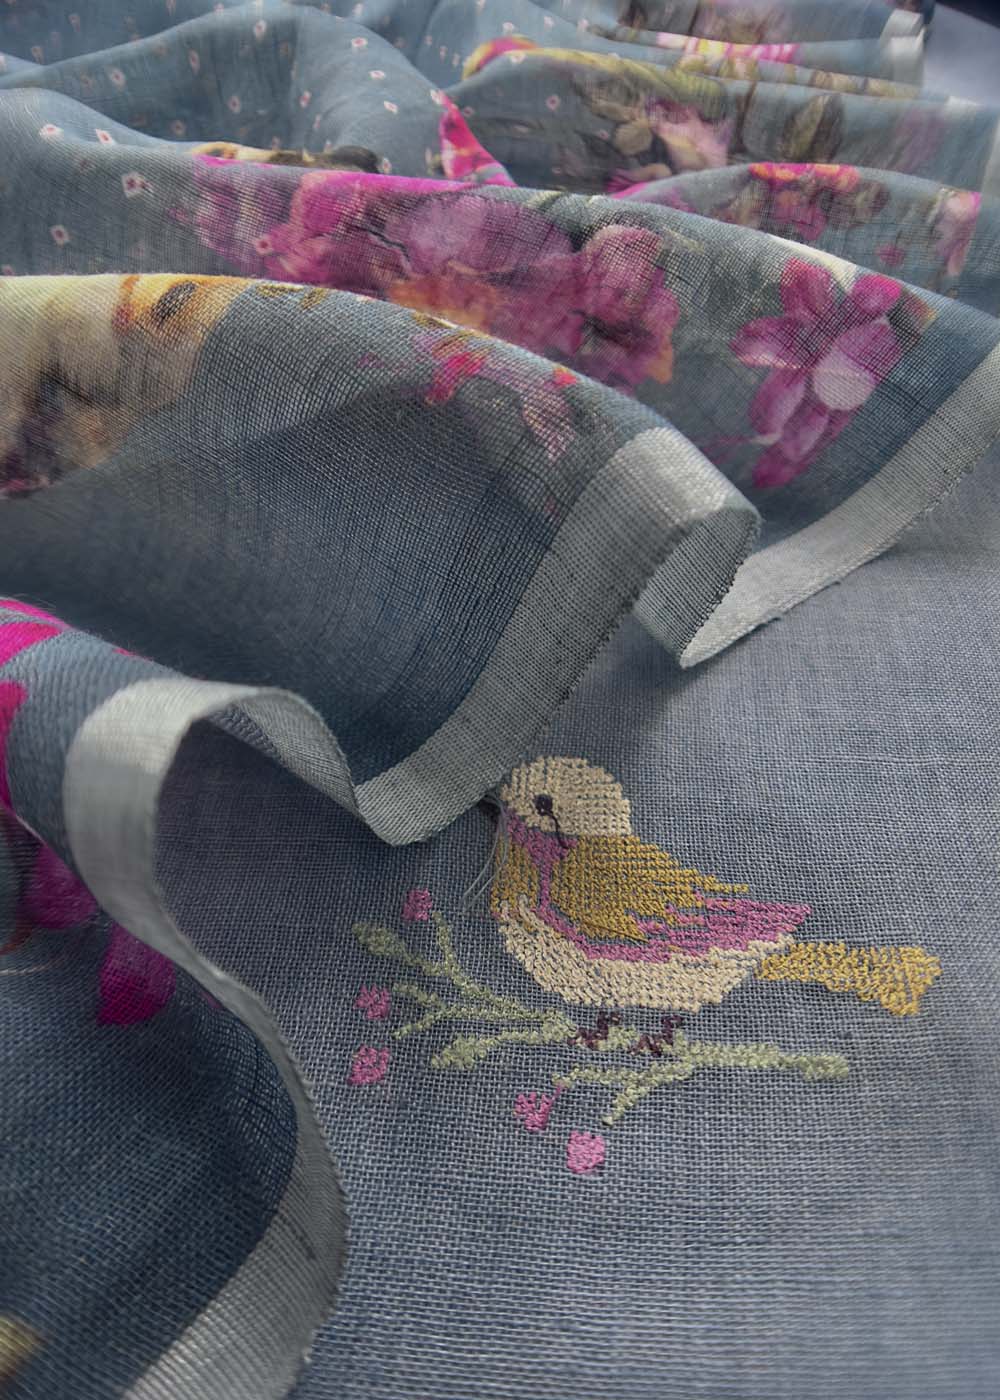 Greyish Blue embroidered linen suit